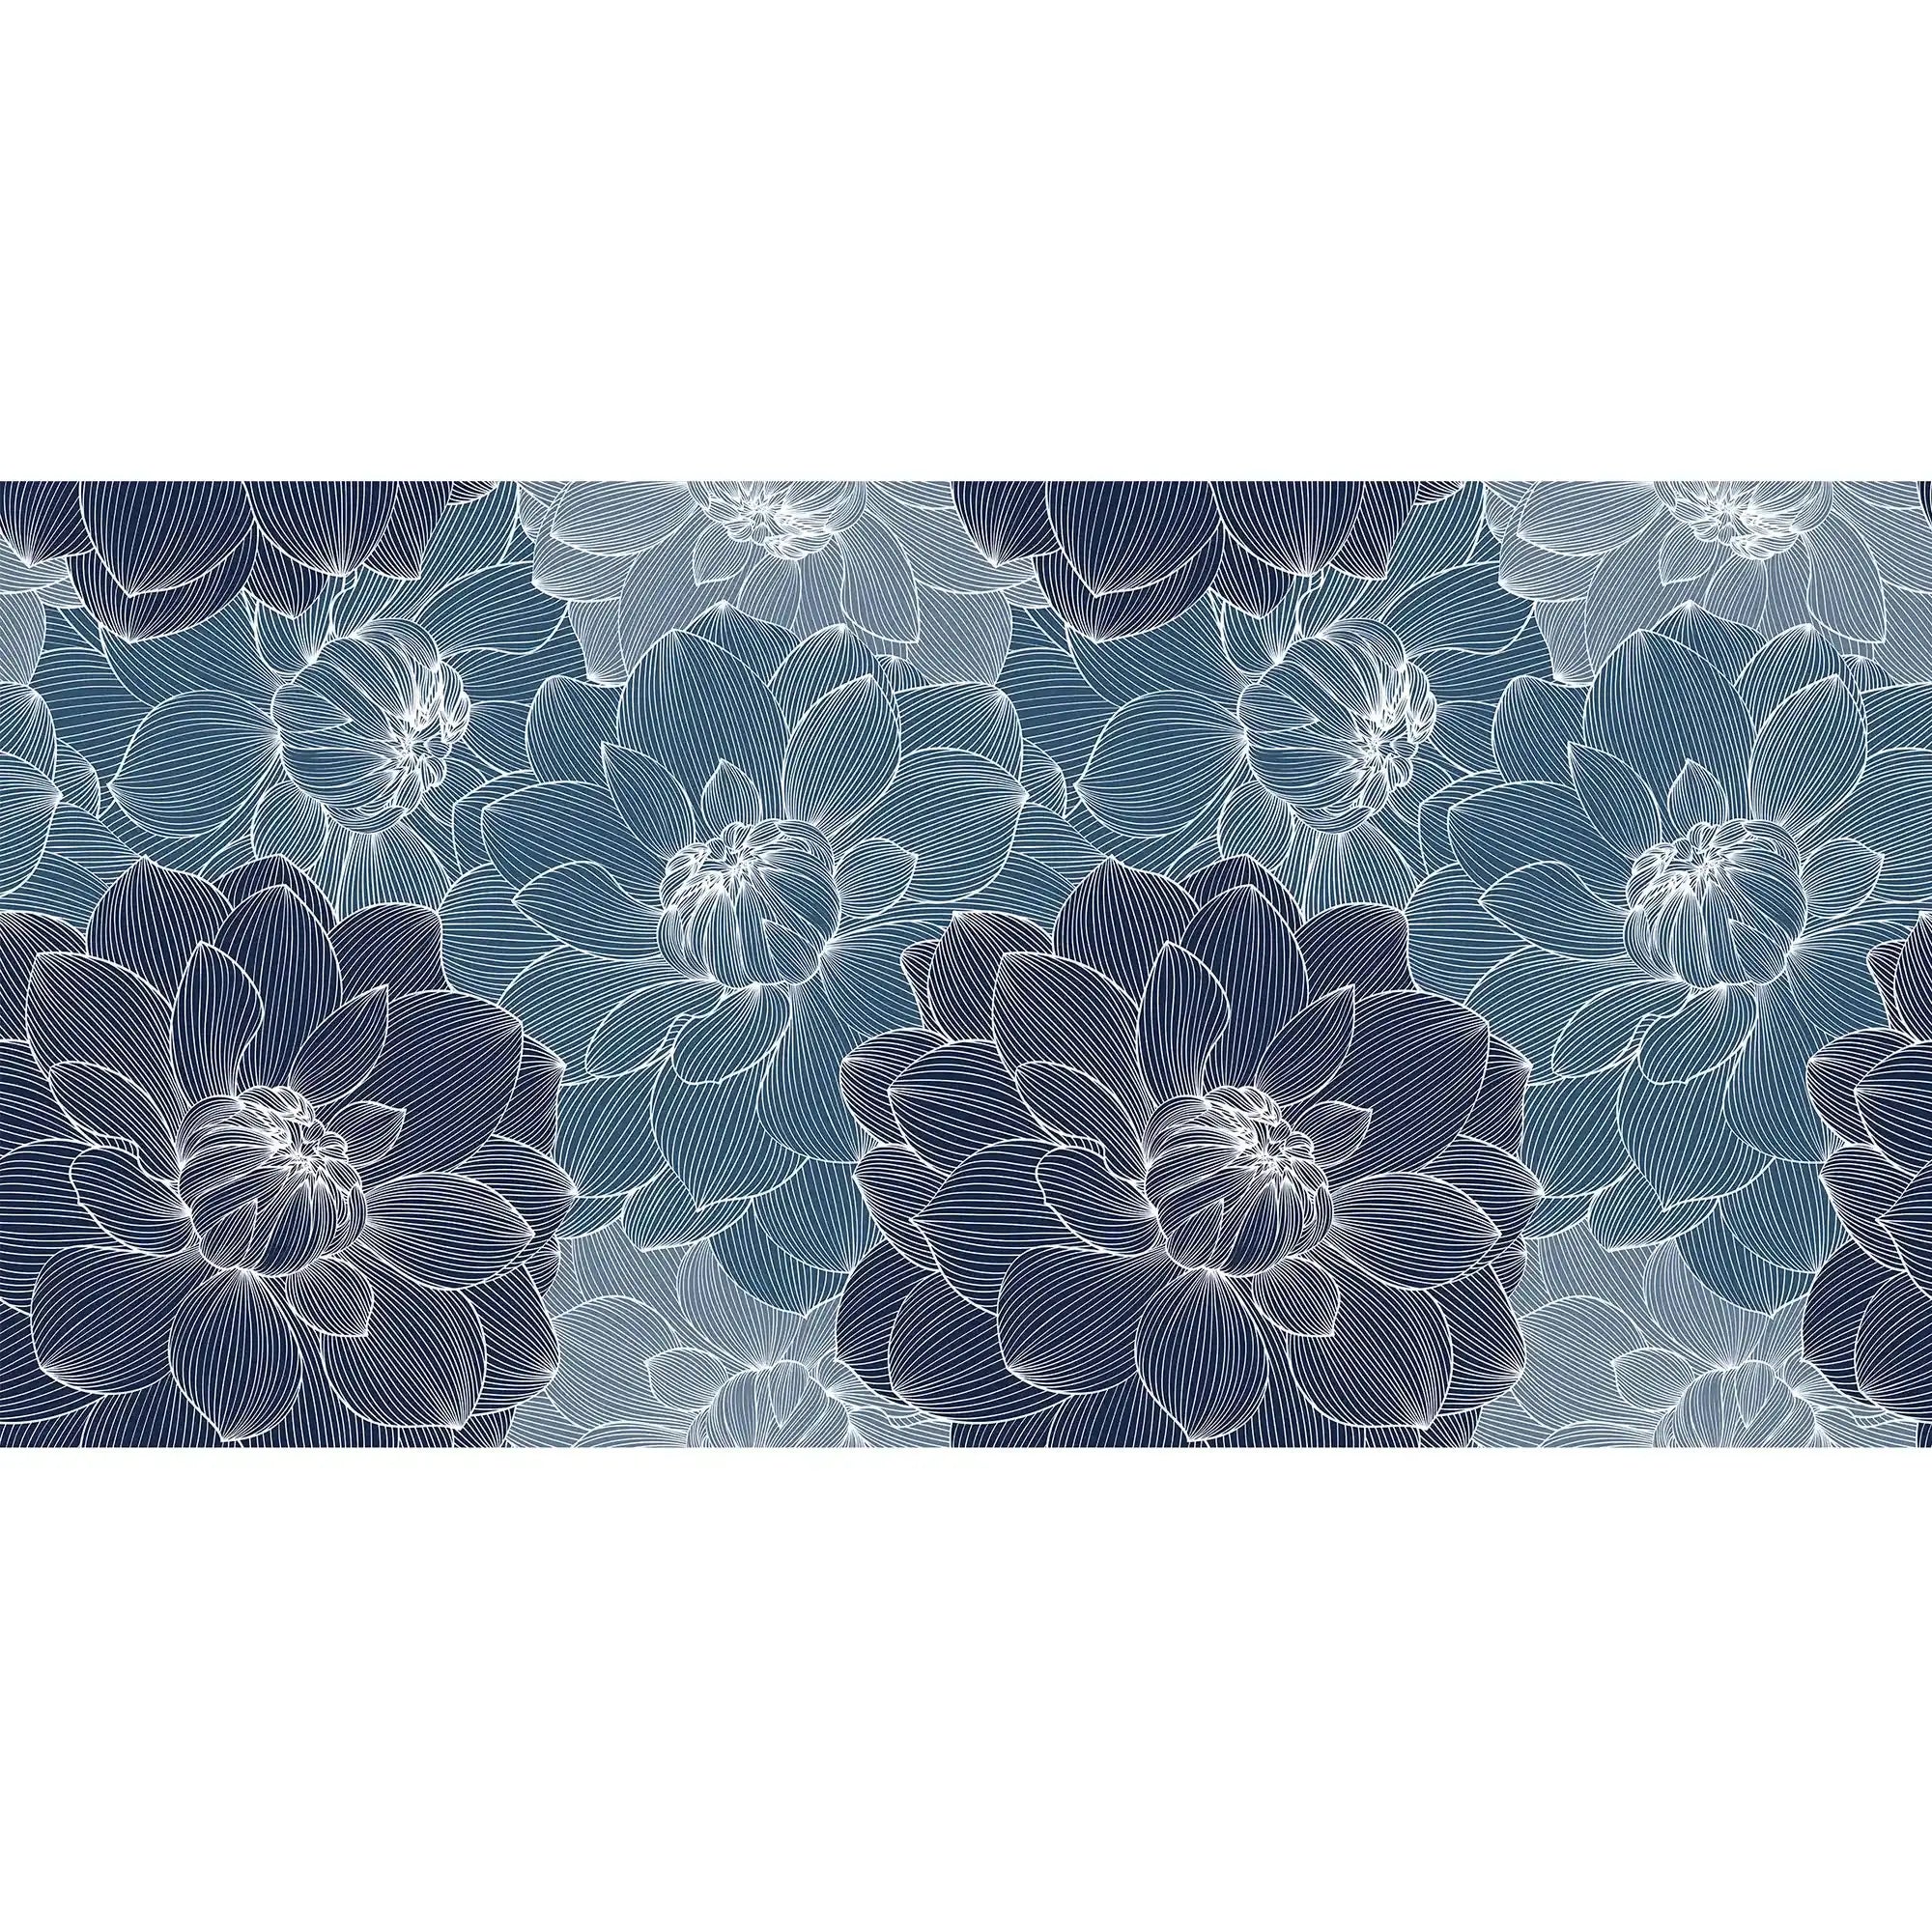 3090-B / Trendy Geometric Floral Self-Adhesive Wallpaper: Transform Your Walls with Easy Install - Artevella